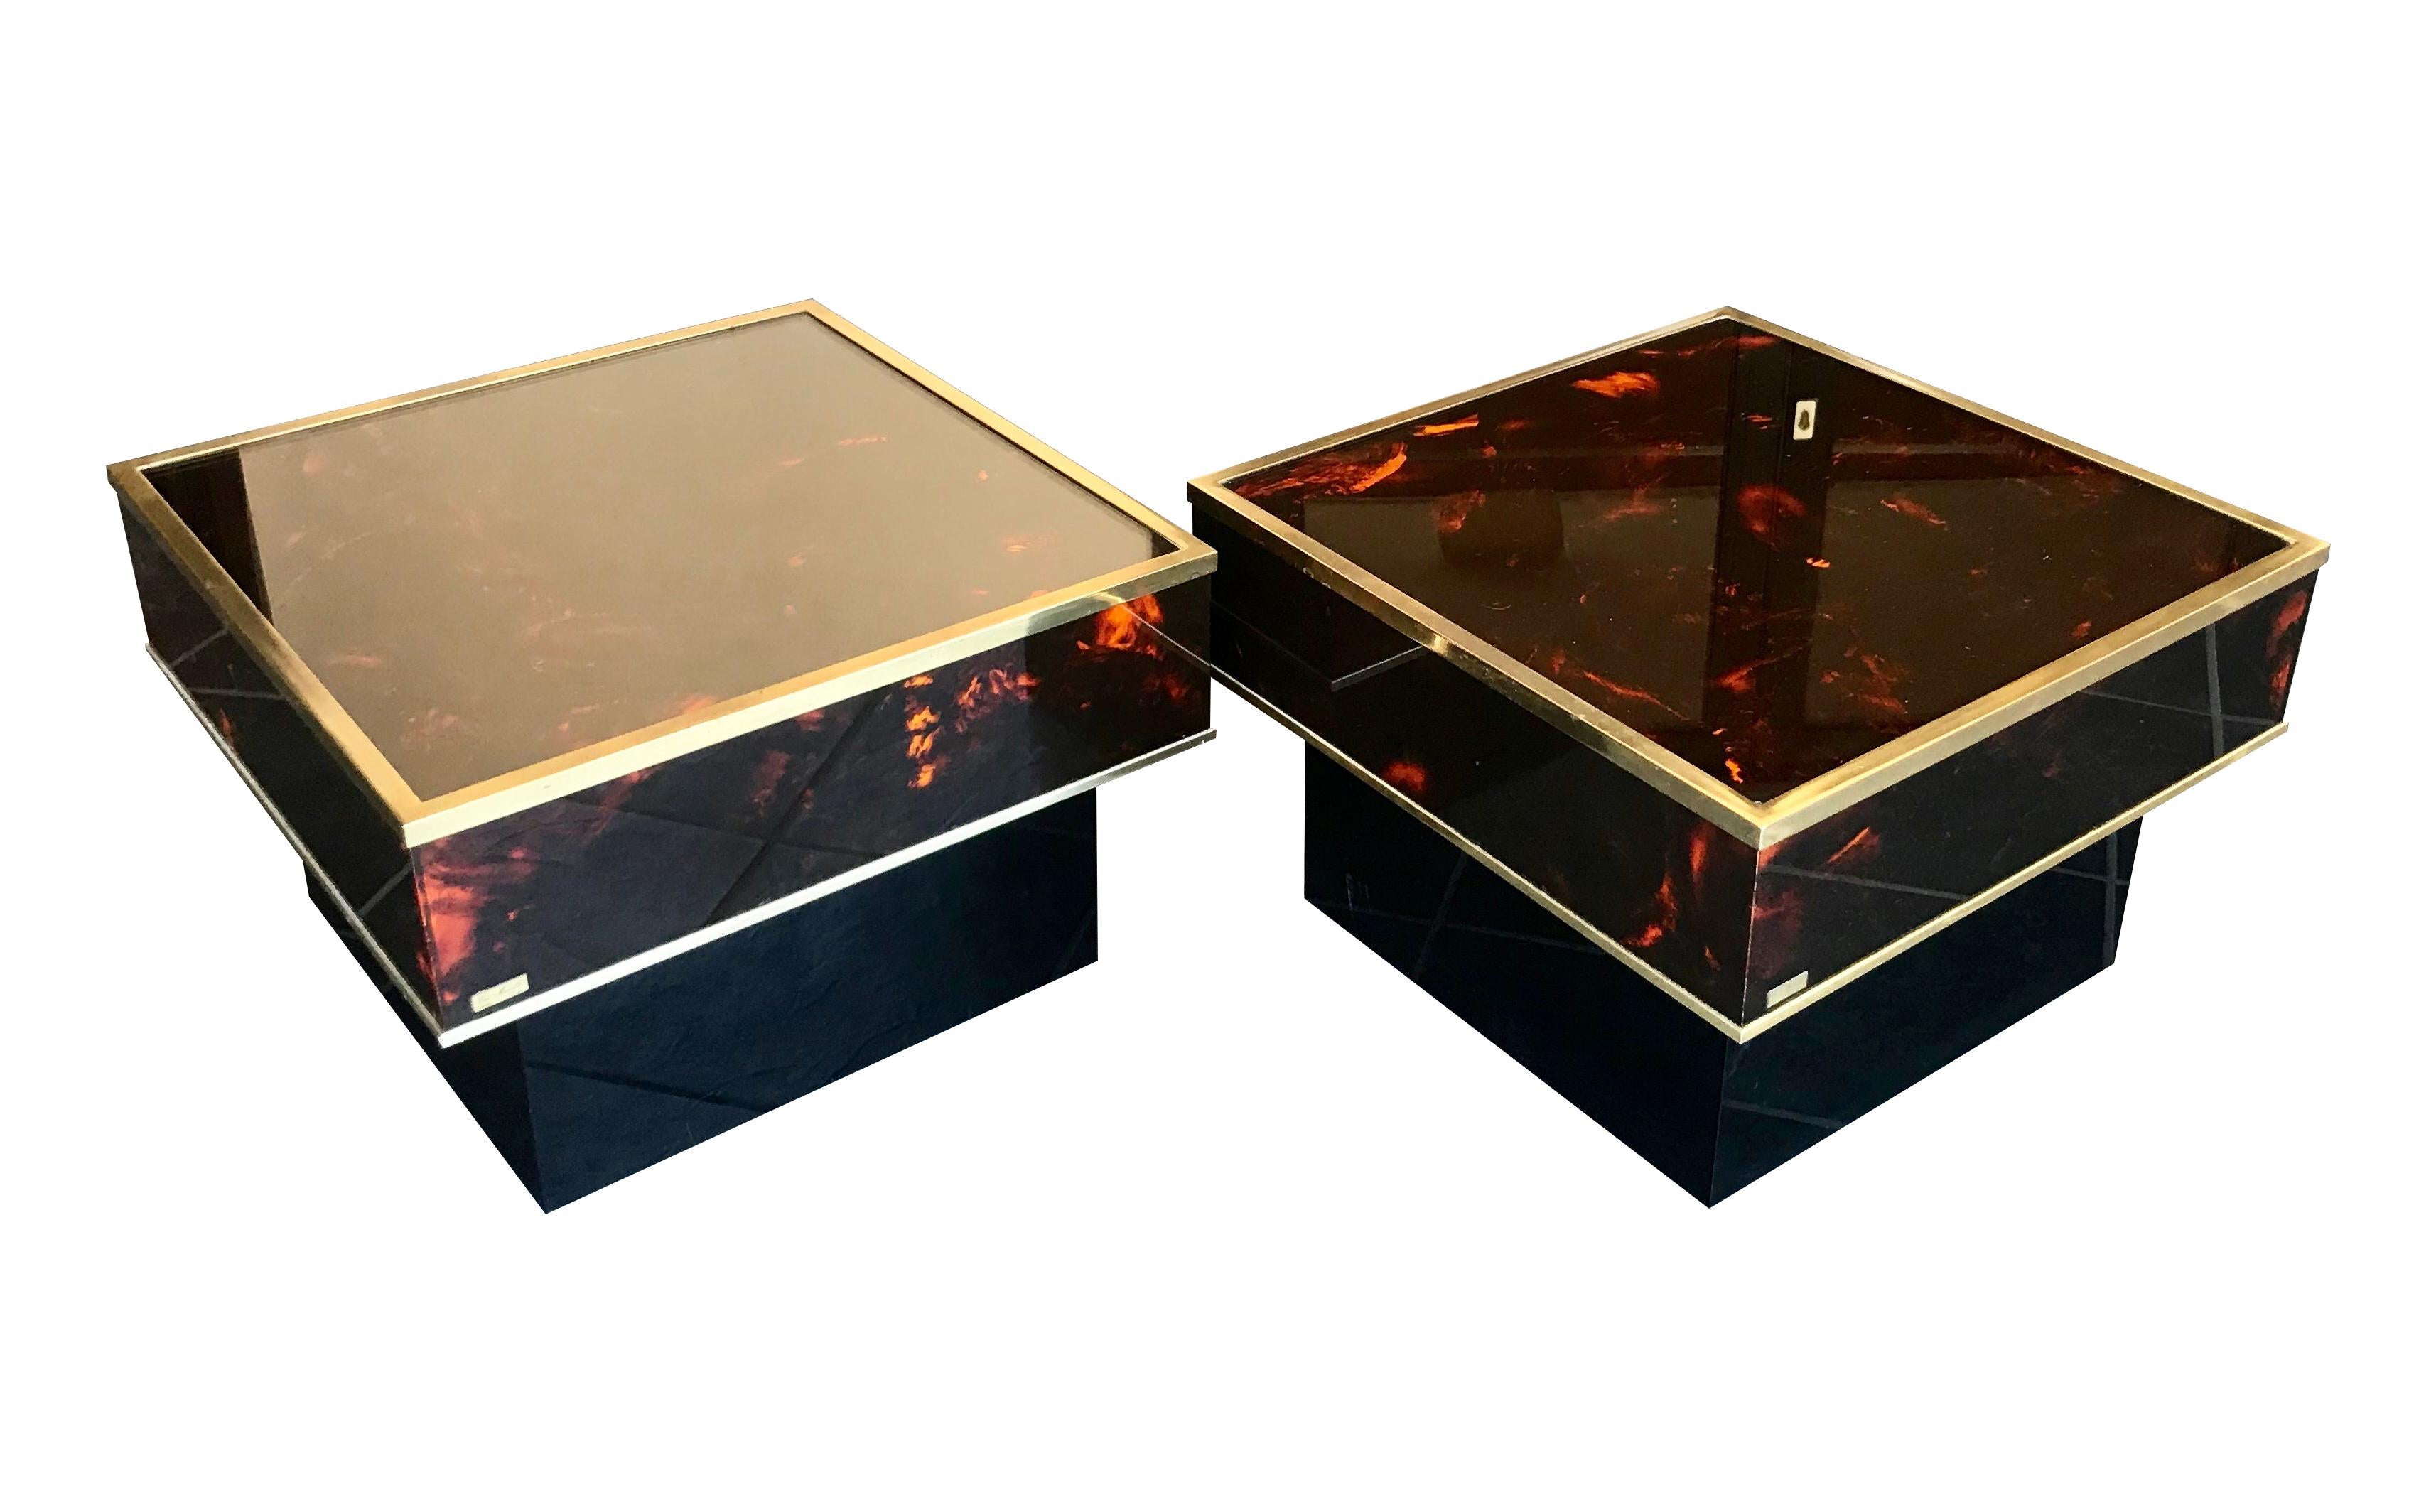 A lovely pair of Eric Maville faux tortoiseshell side tables, with brass edging and glass tops mounted on a black laminated base. Each with 